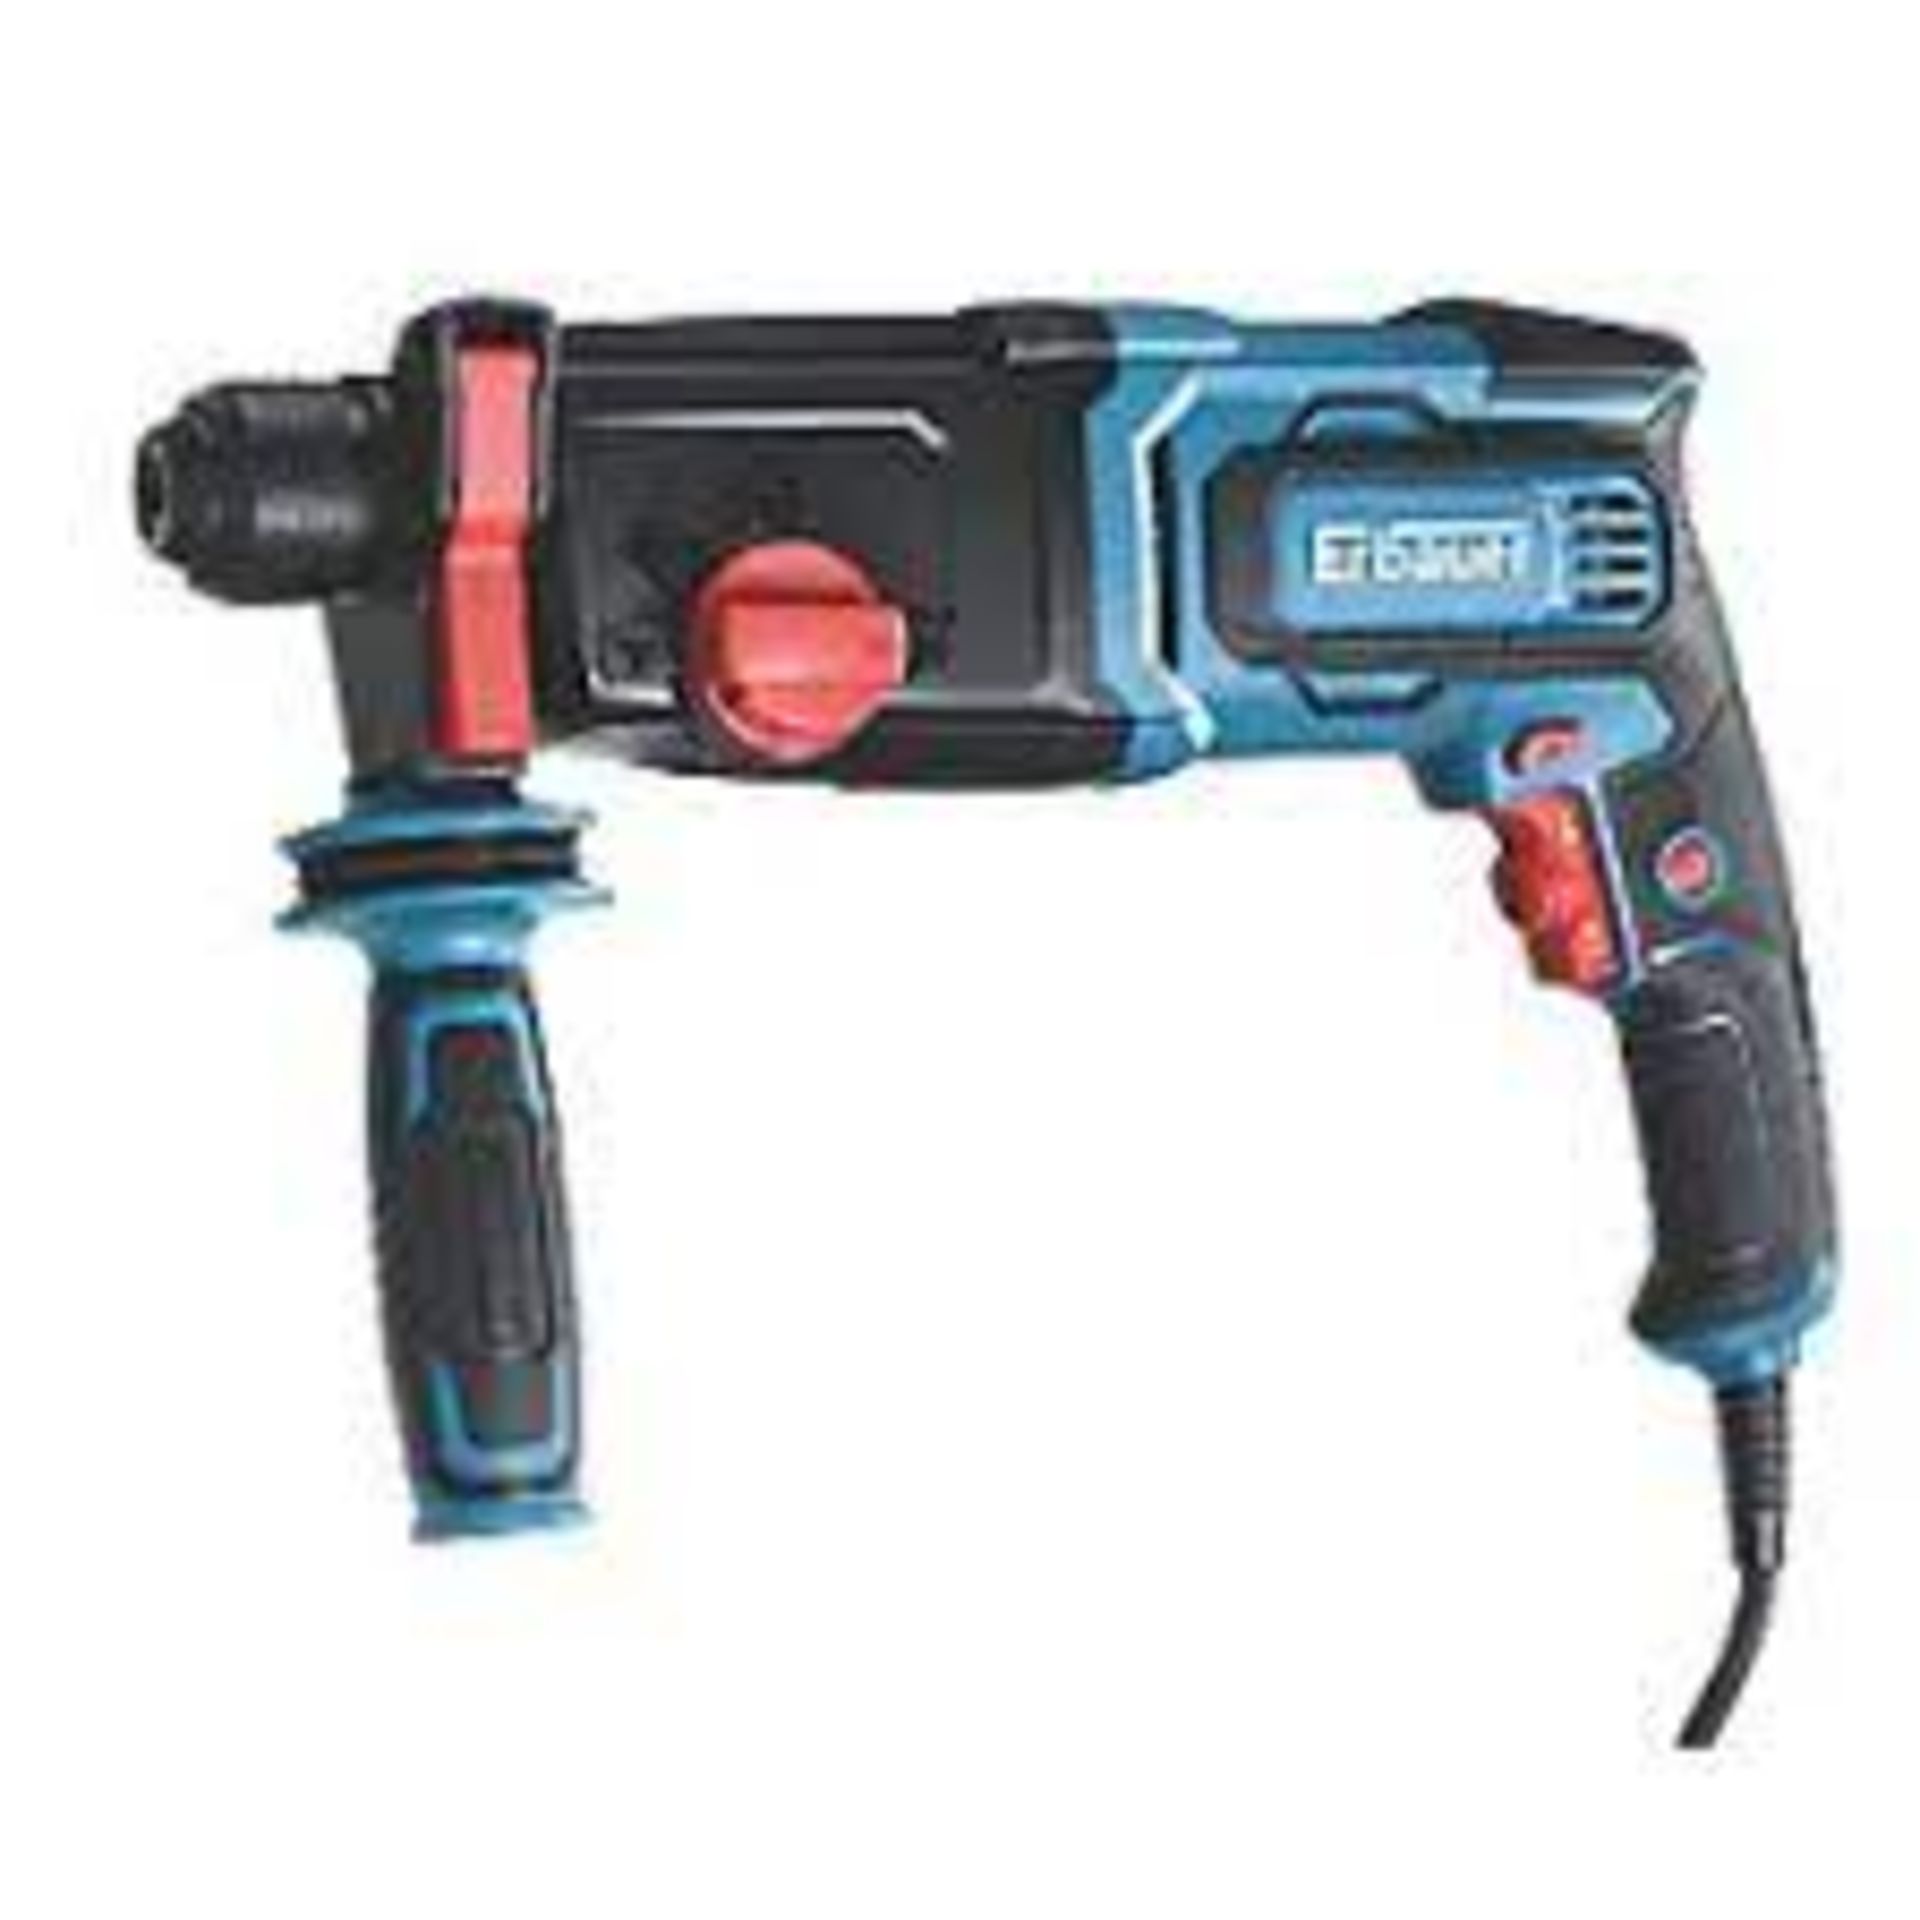 ERBAUER 3.4KG ELECTRIC SDS PLUS DRILL 220-240V. -ER40. Powerful 750W motor. Features hammer, drill